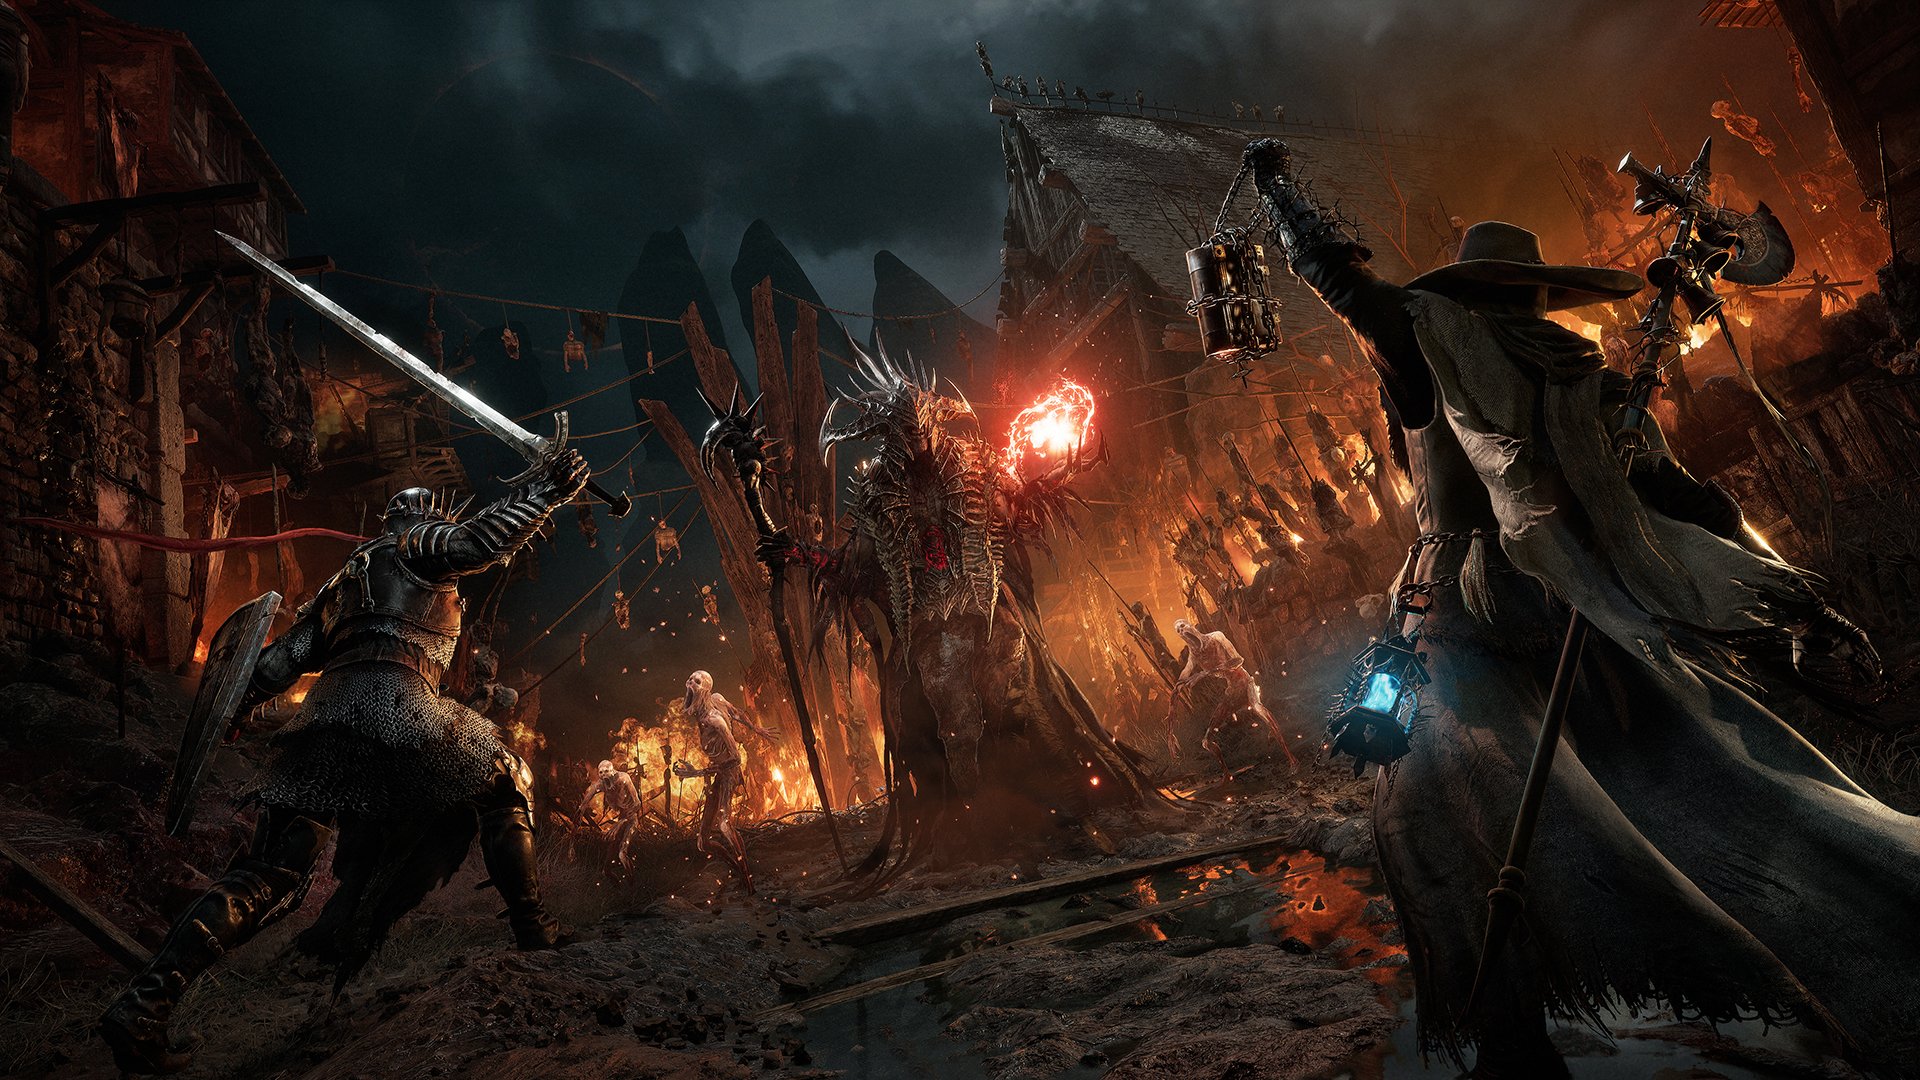 LORDS OF THE FALLEN on X: The mantle of the Dark Crusader beckons